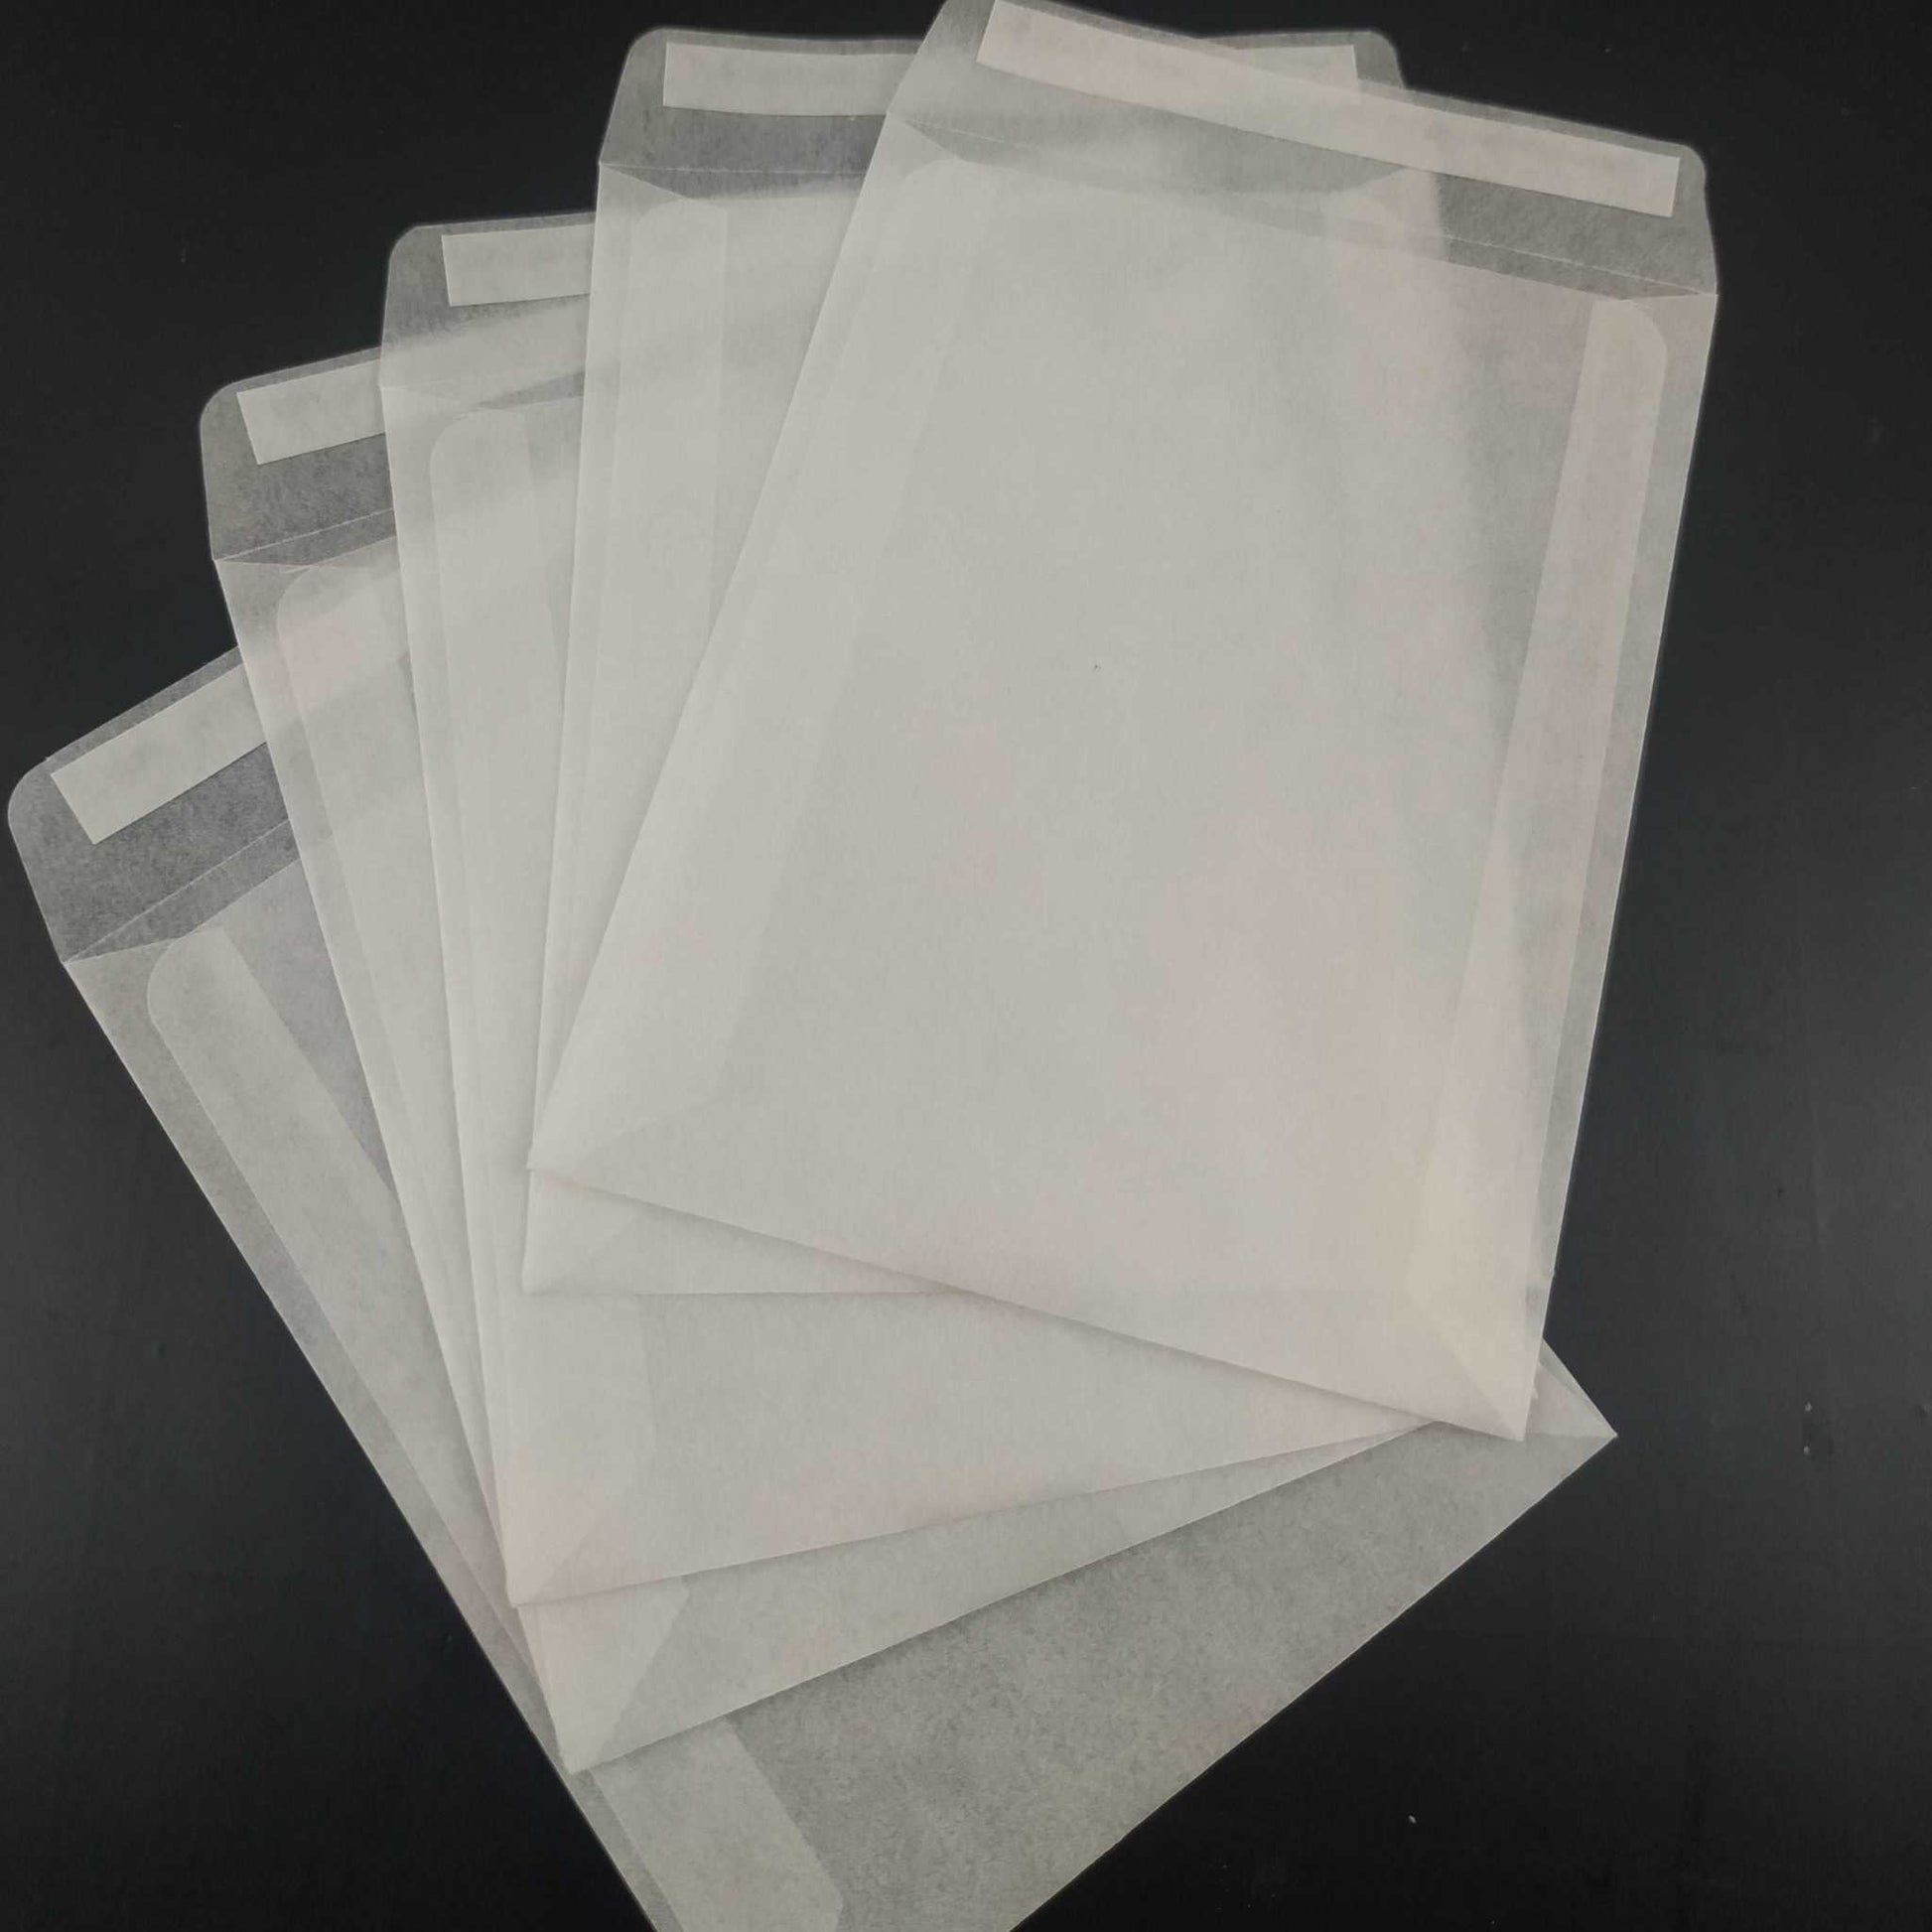 Assorted sizes of eco-friendly glassine peel and seal envelopes, showcasing small and large options for sustainable, biodegradable packaging solutions